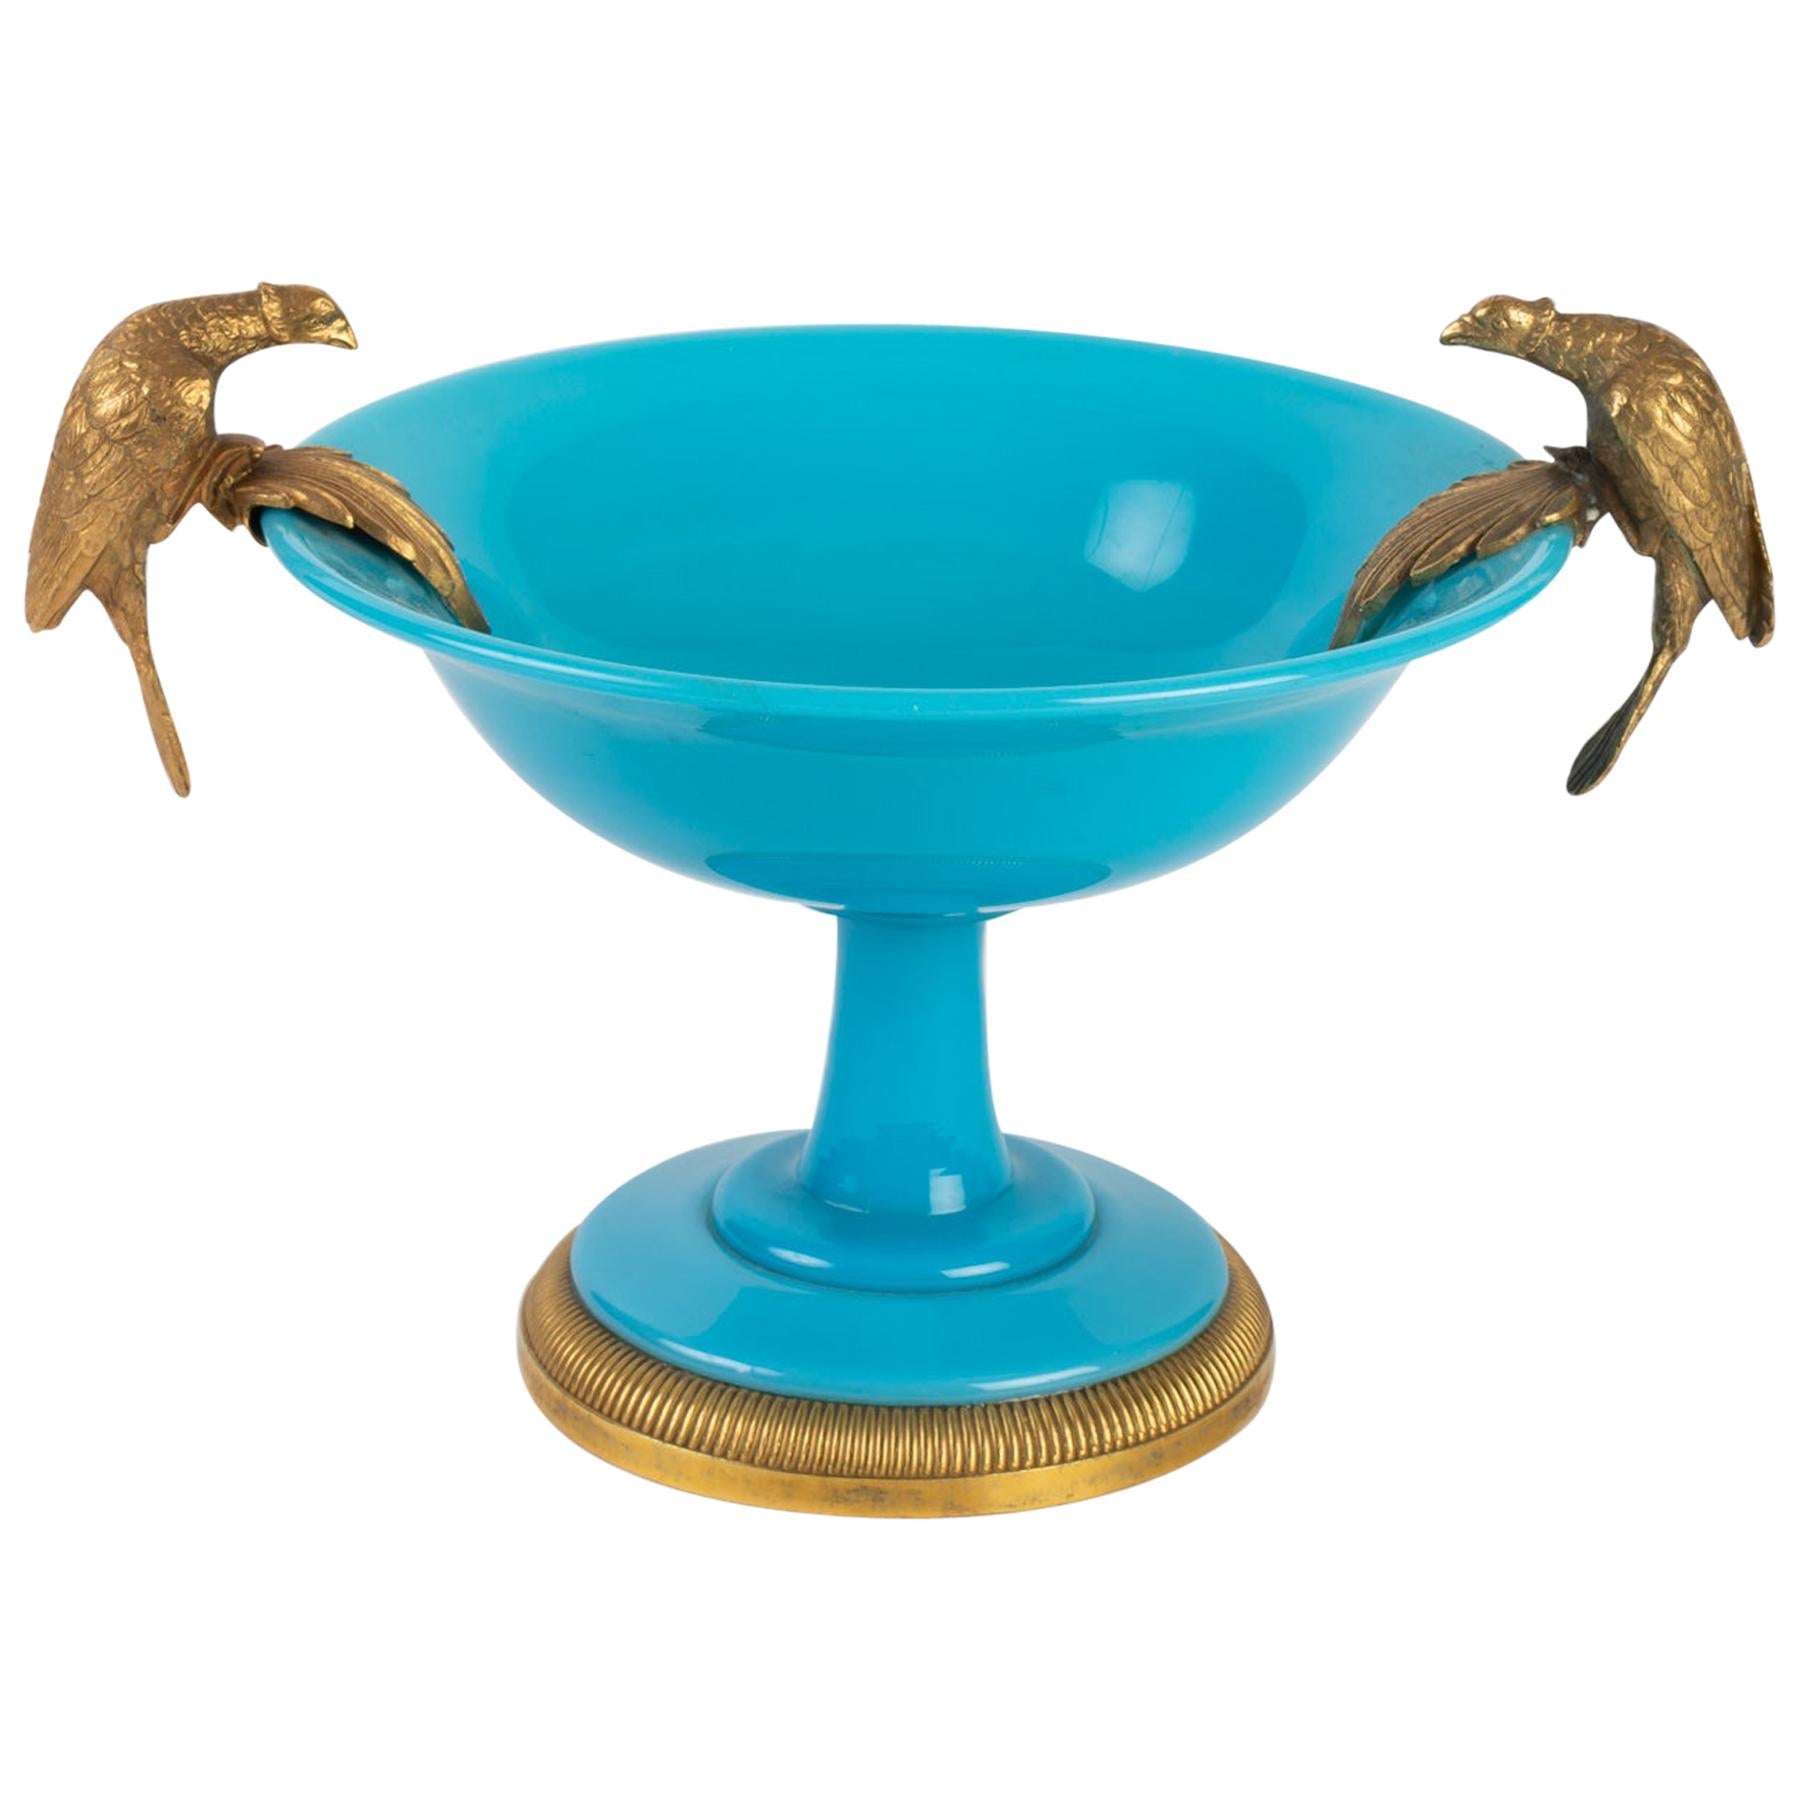 Bronze Mounted Turquoise Blue Opaline Cup For Sale